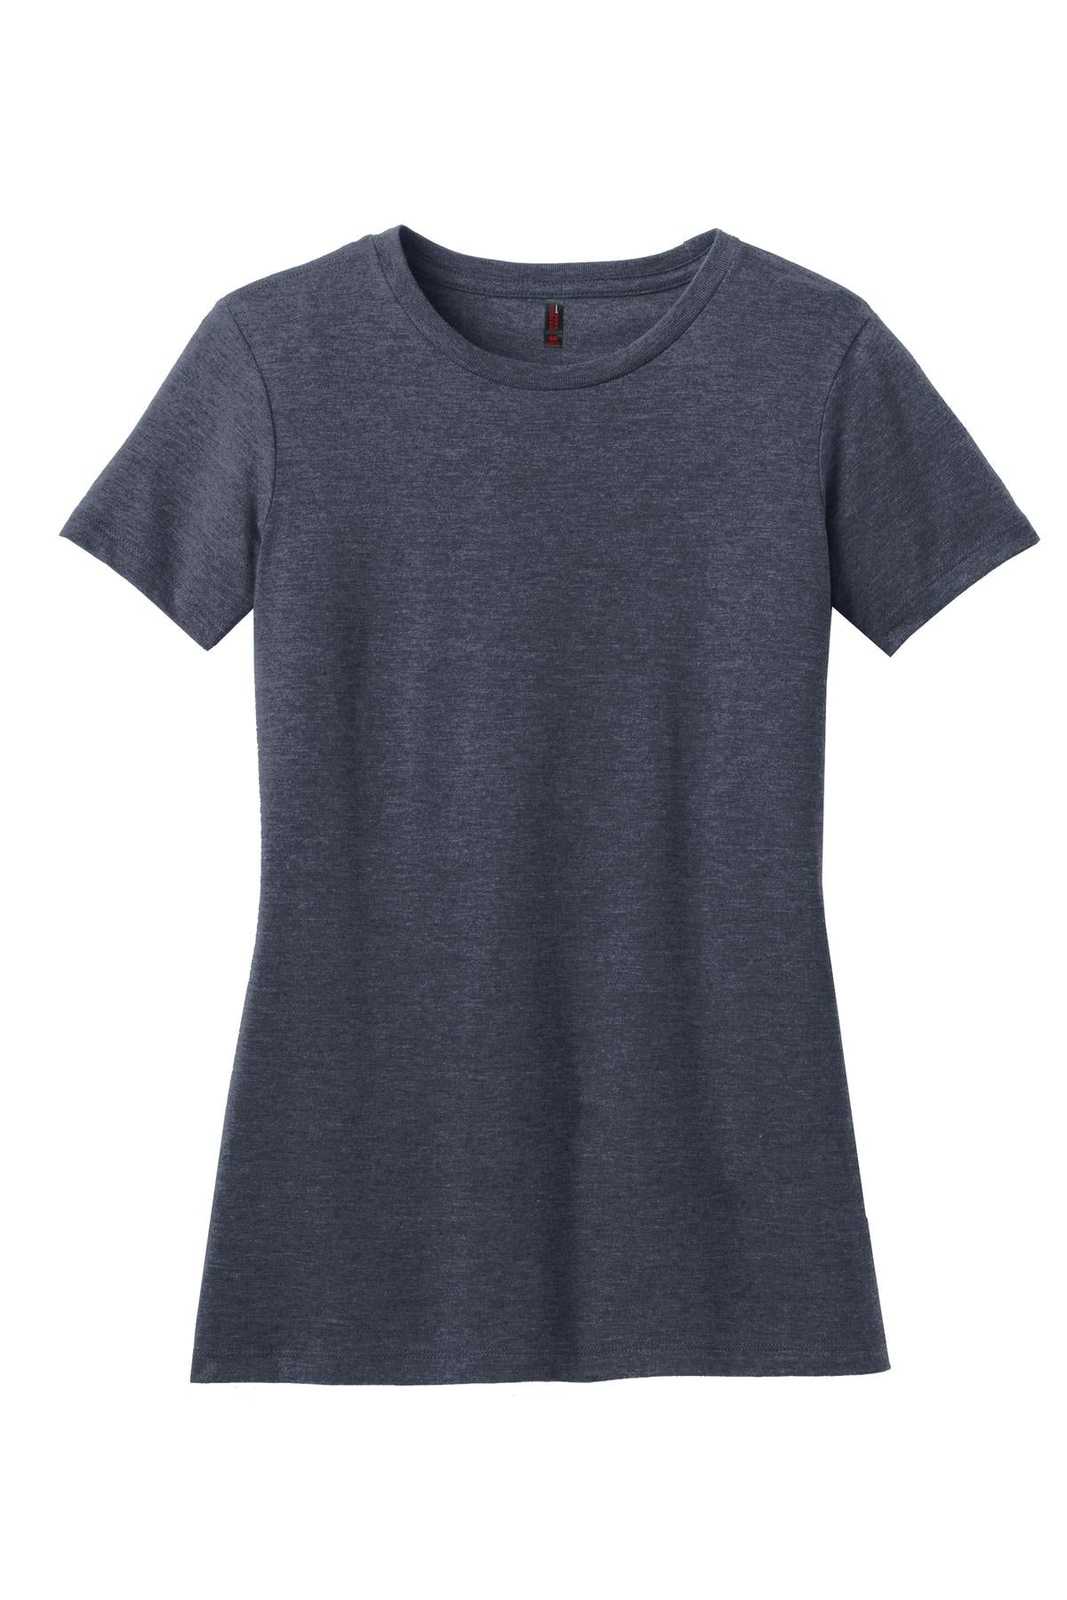 District DM108L Women's Perfect Blend Tee - Heathered Navy - HIT a Double - 1